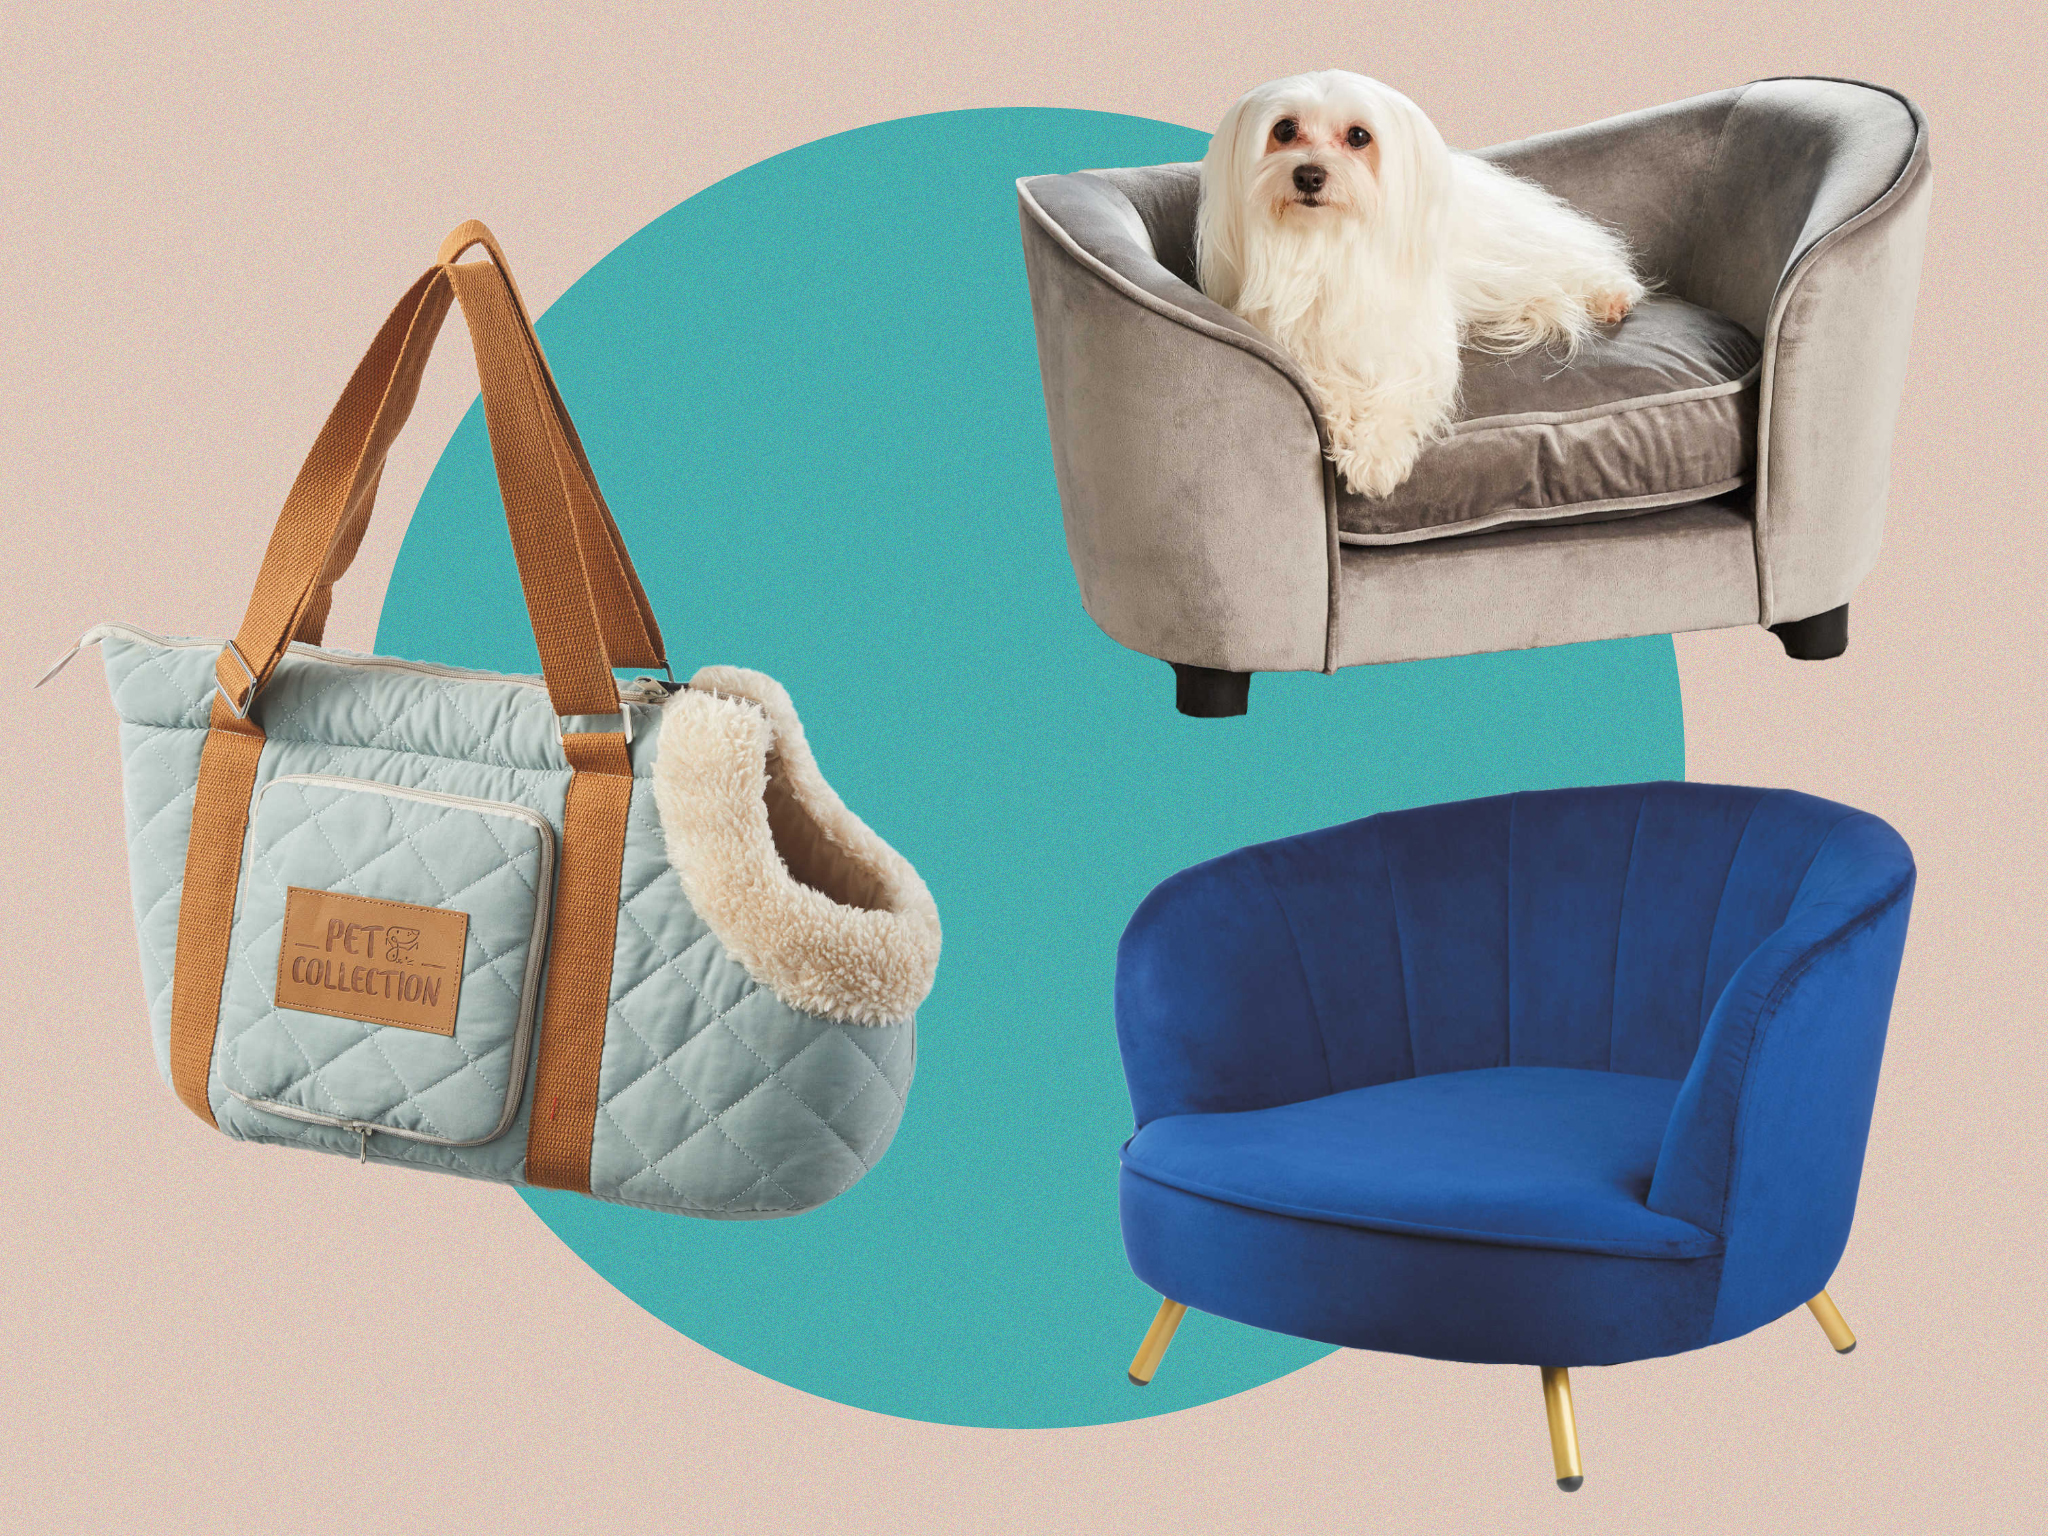 Match your pet essentials with your furniture